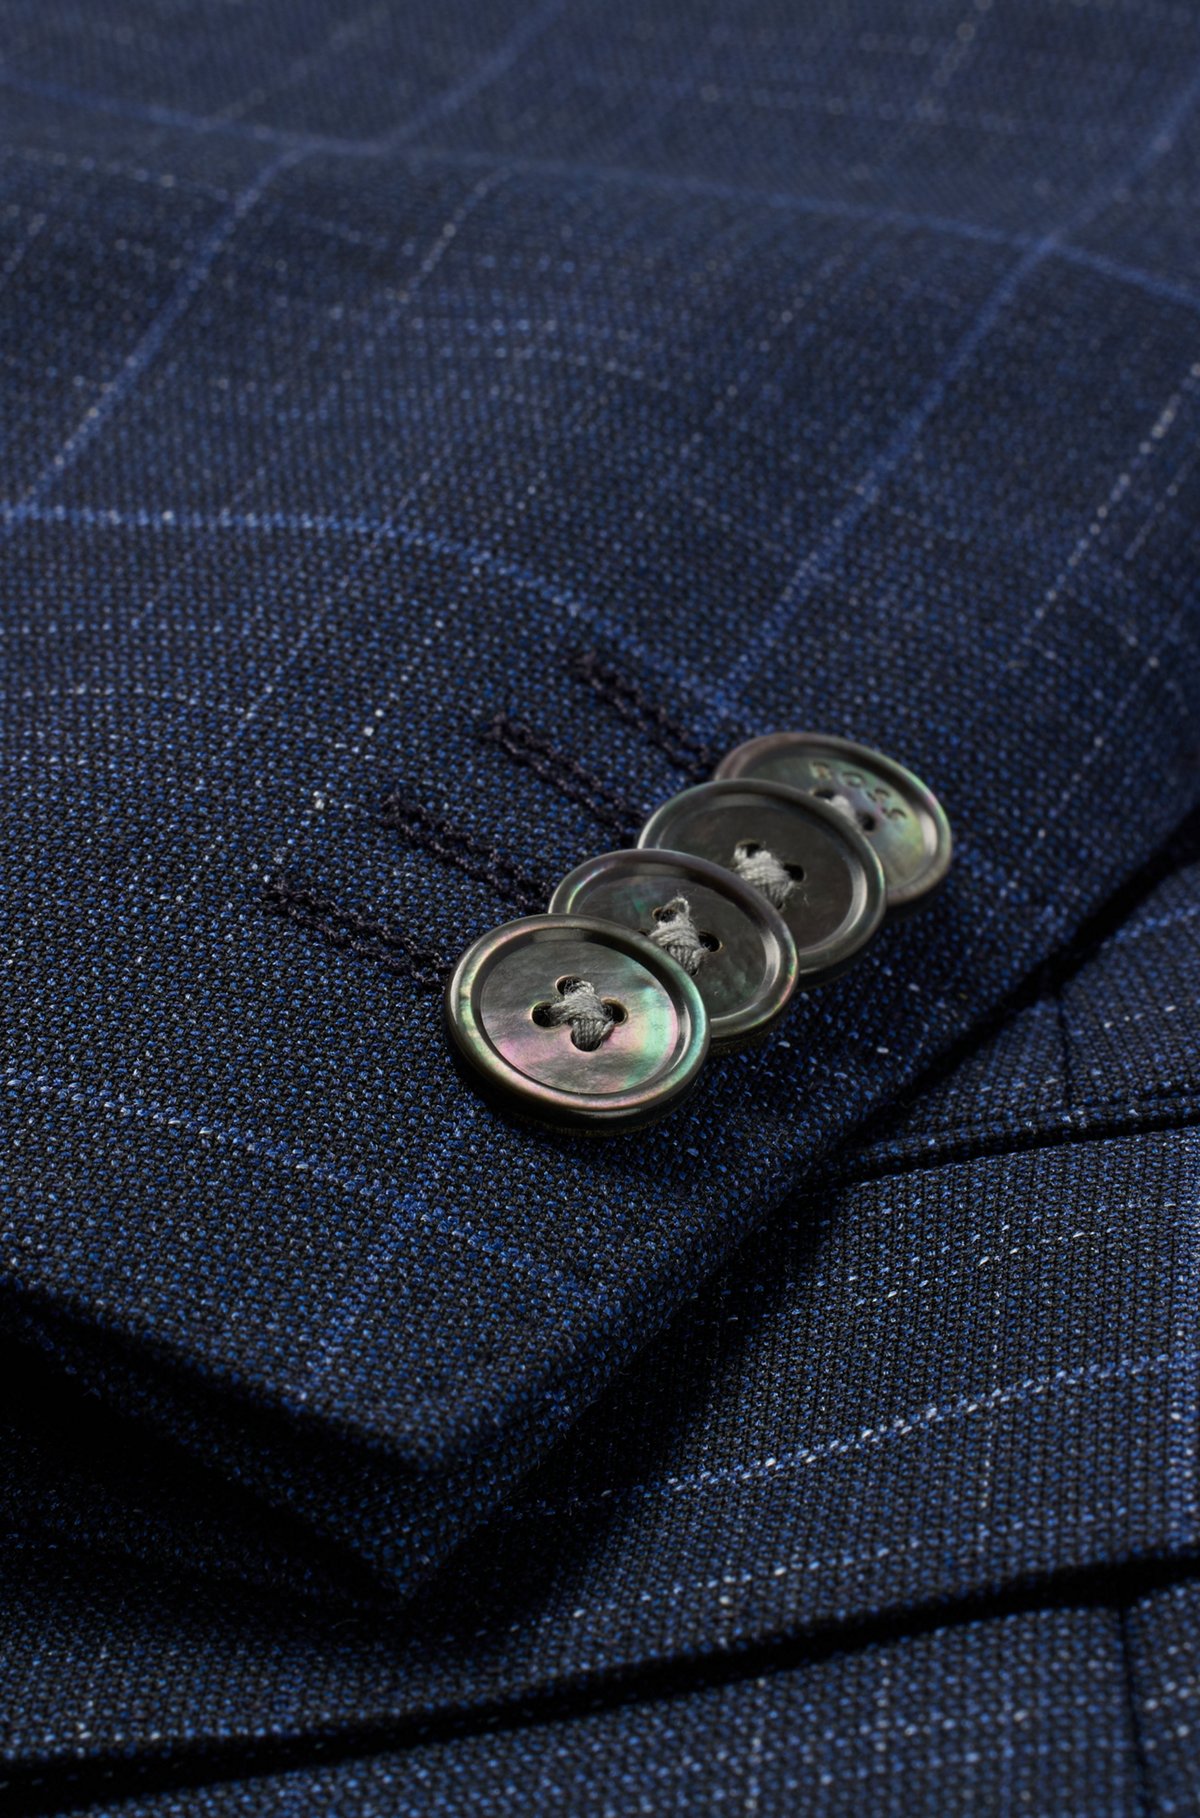 BOSS - Slim-fit suit in a checked virgin-wool blend